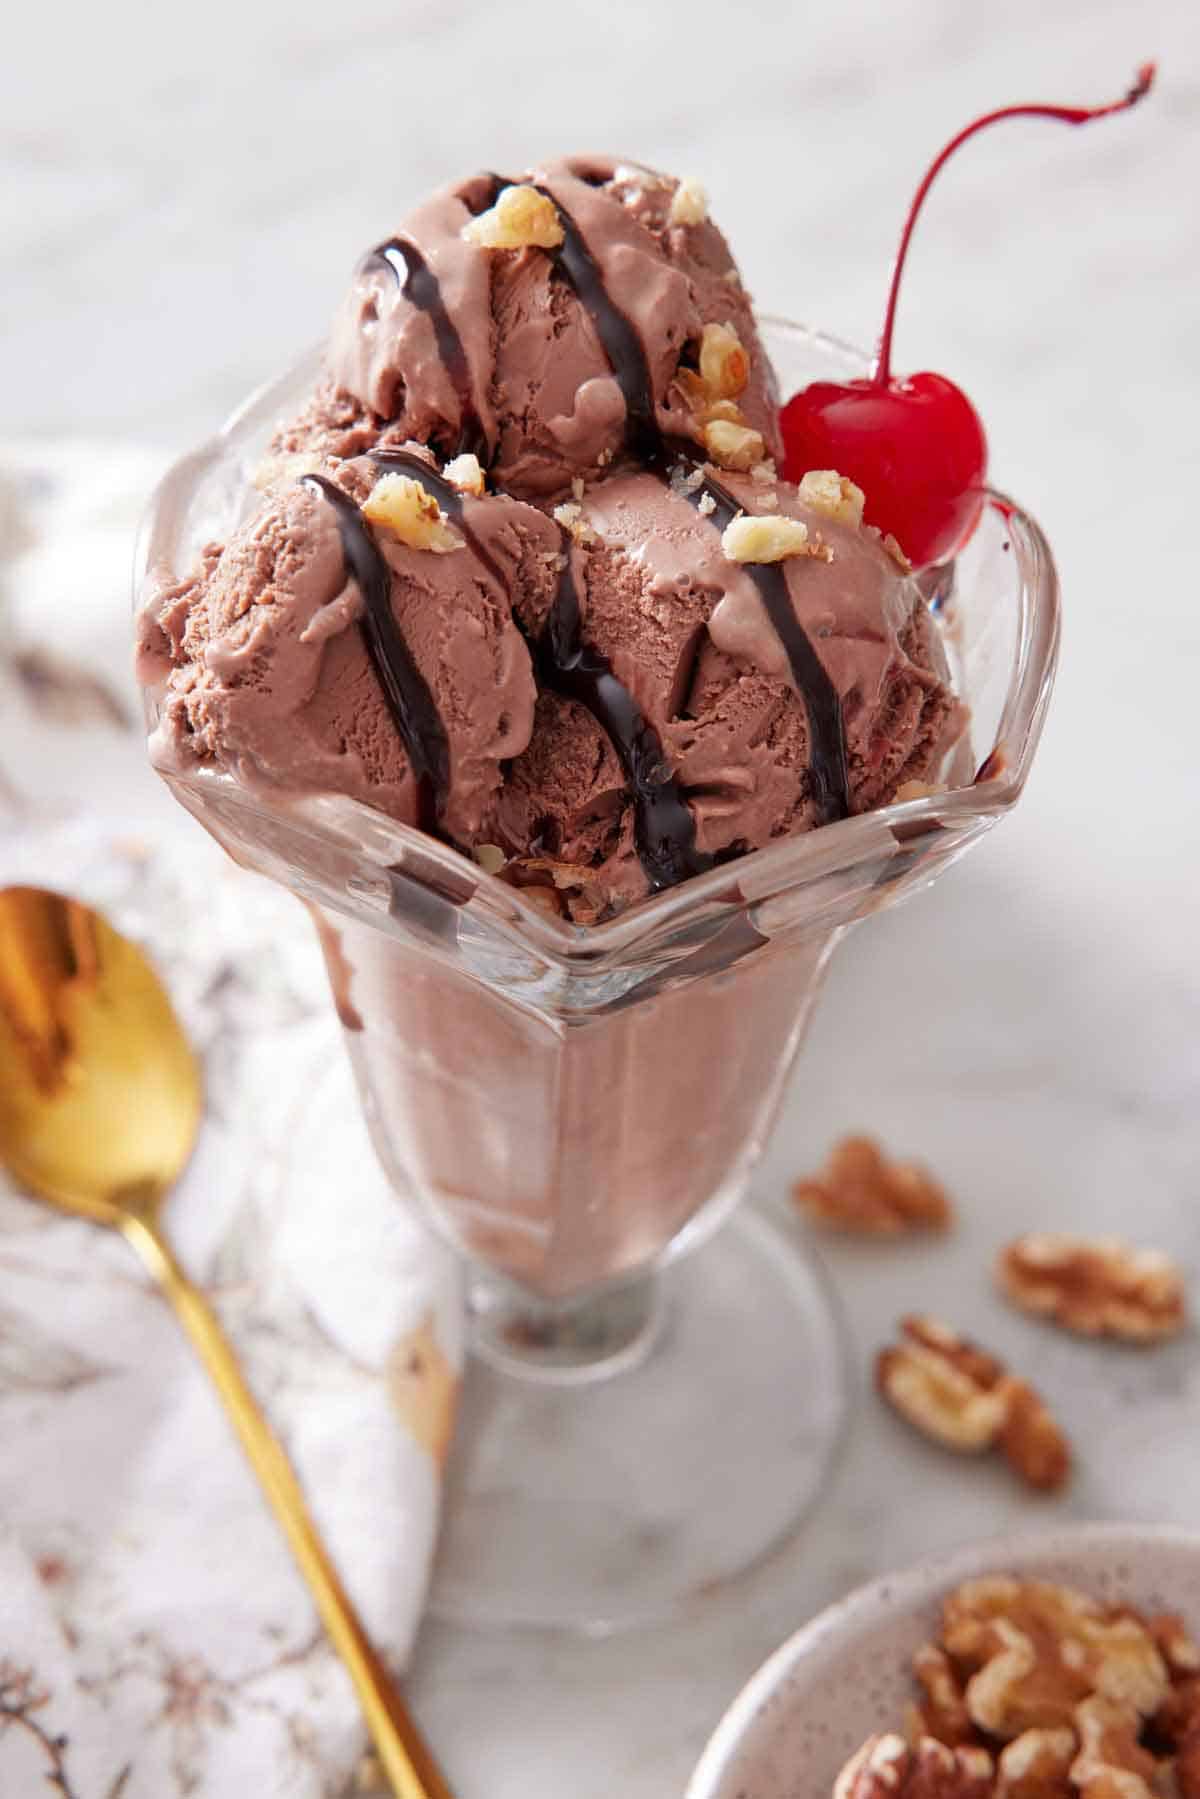 A glass with chocolate ice cream topped with a cherry, chocolate drizzle, and crushed nuts.